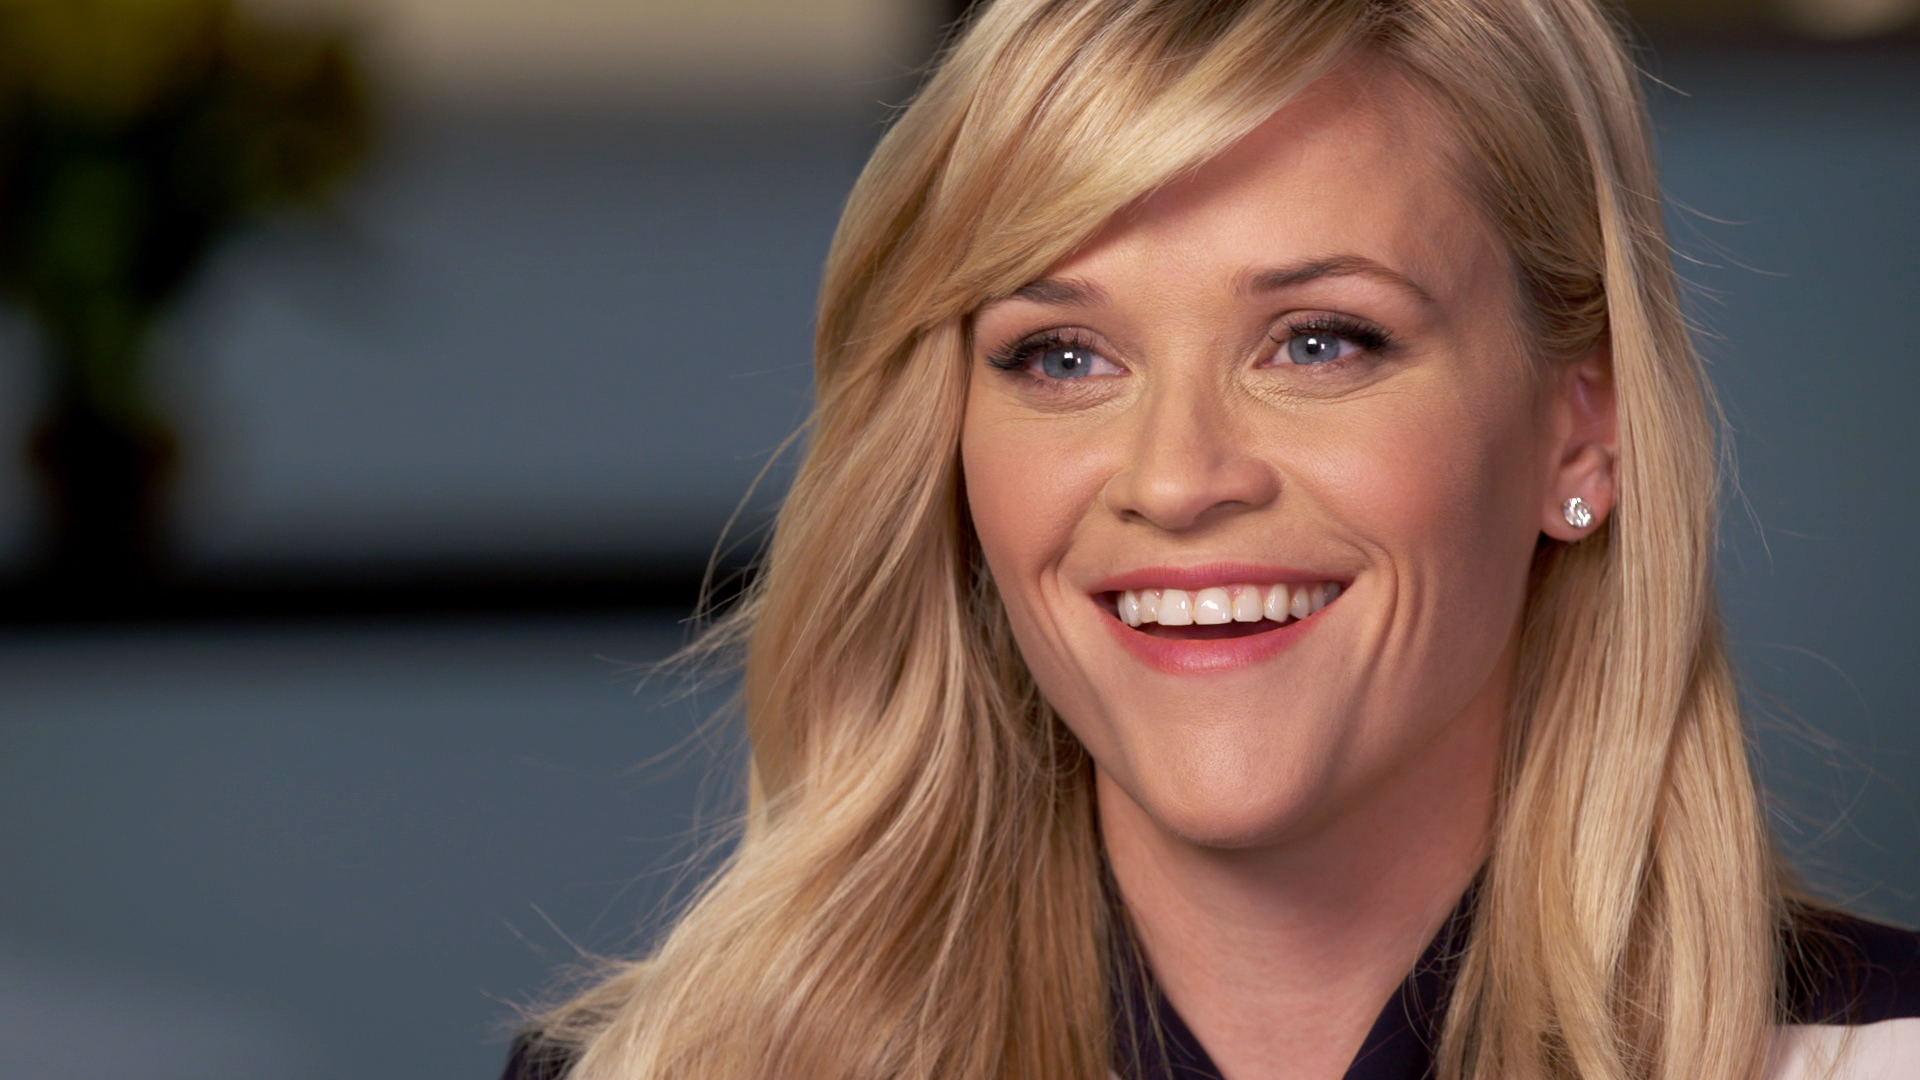 Reese Witherspoon Having Sex - Reese Witherspoon: Ready for a change - CBS News